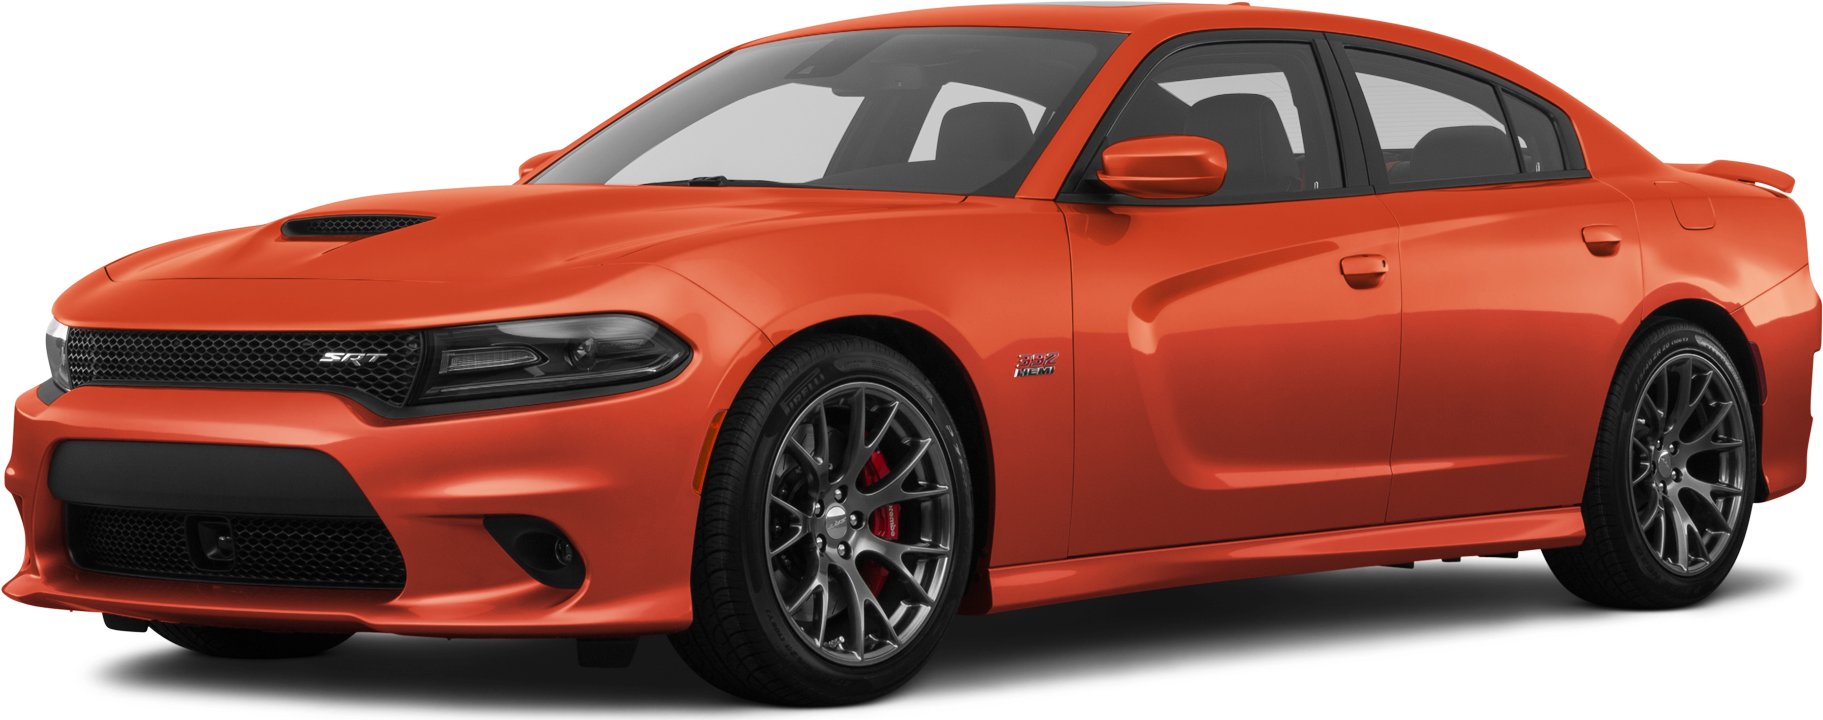 2017 Dodge Charger Review, Pricing, and Specs